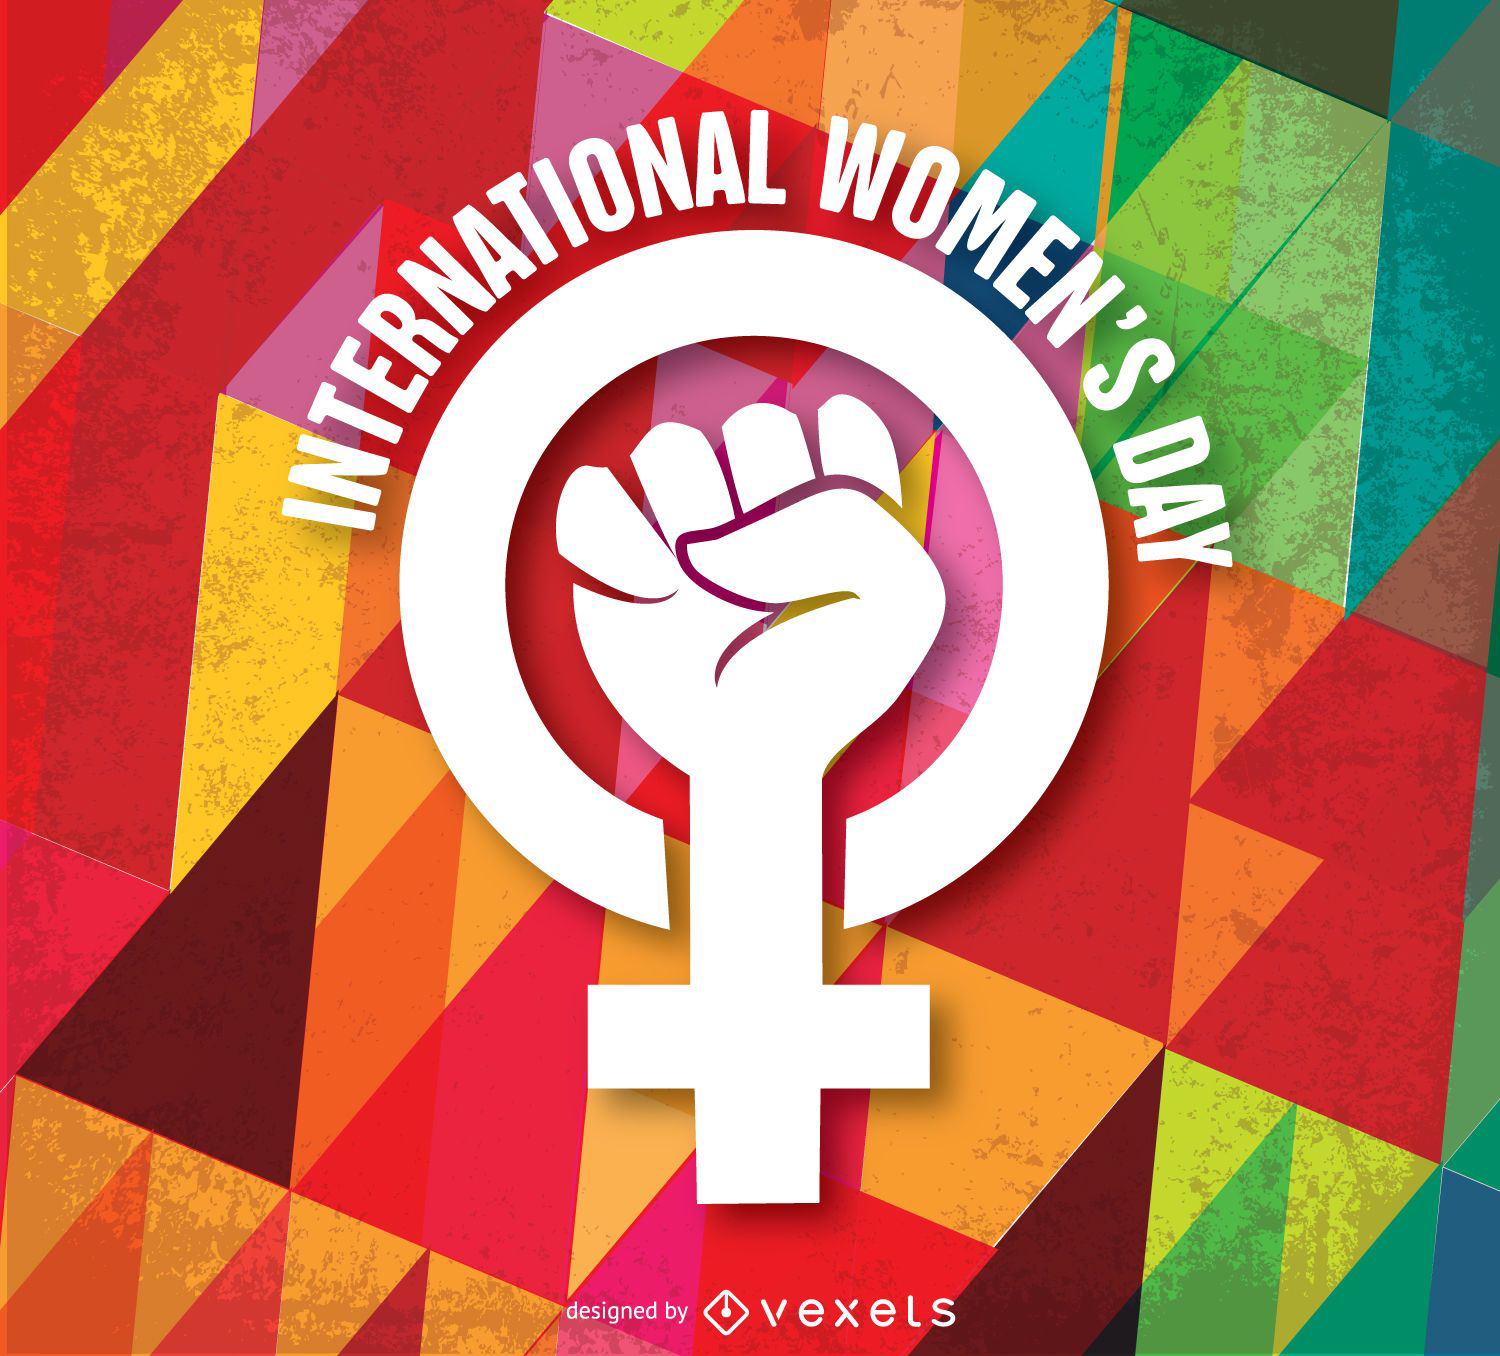 Women's day symbol and background